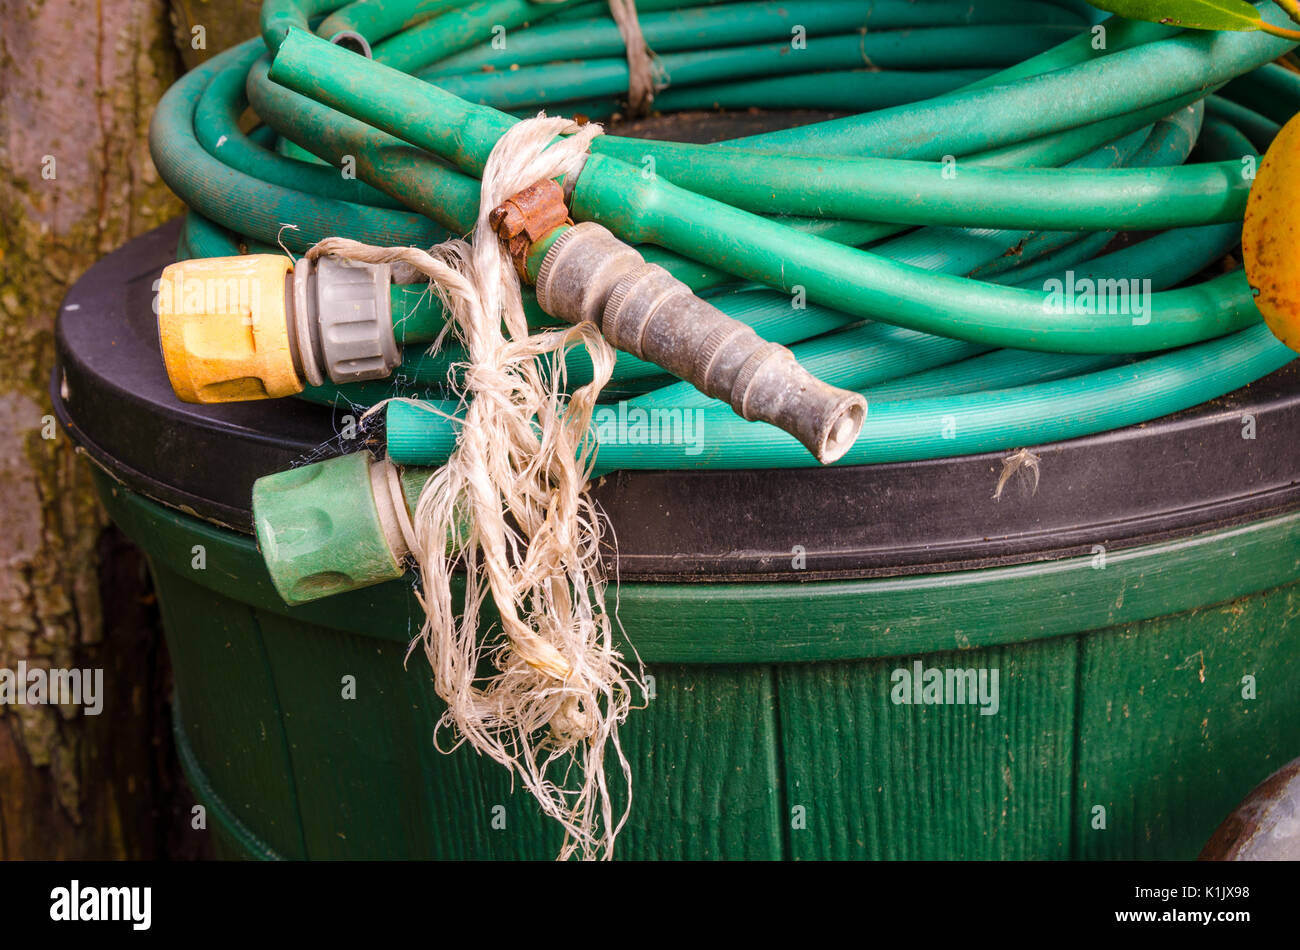 An old hose pipe with tap connectors and a spray nozzle curled up and left  on top of a bin in a back garden Stock Photo - Alamy